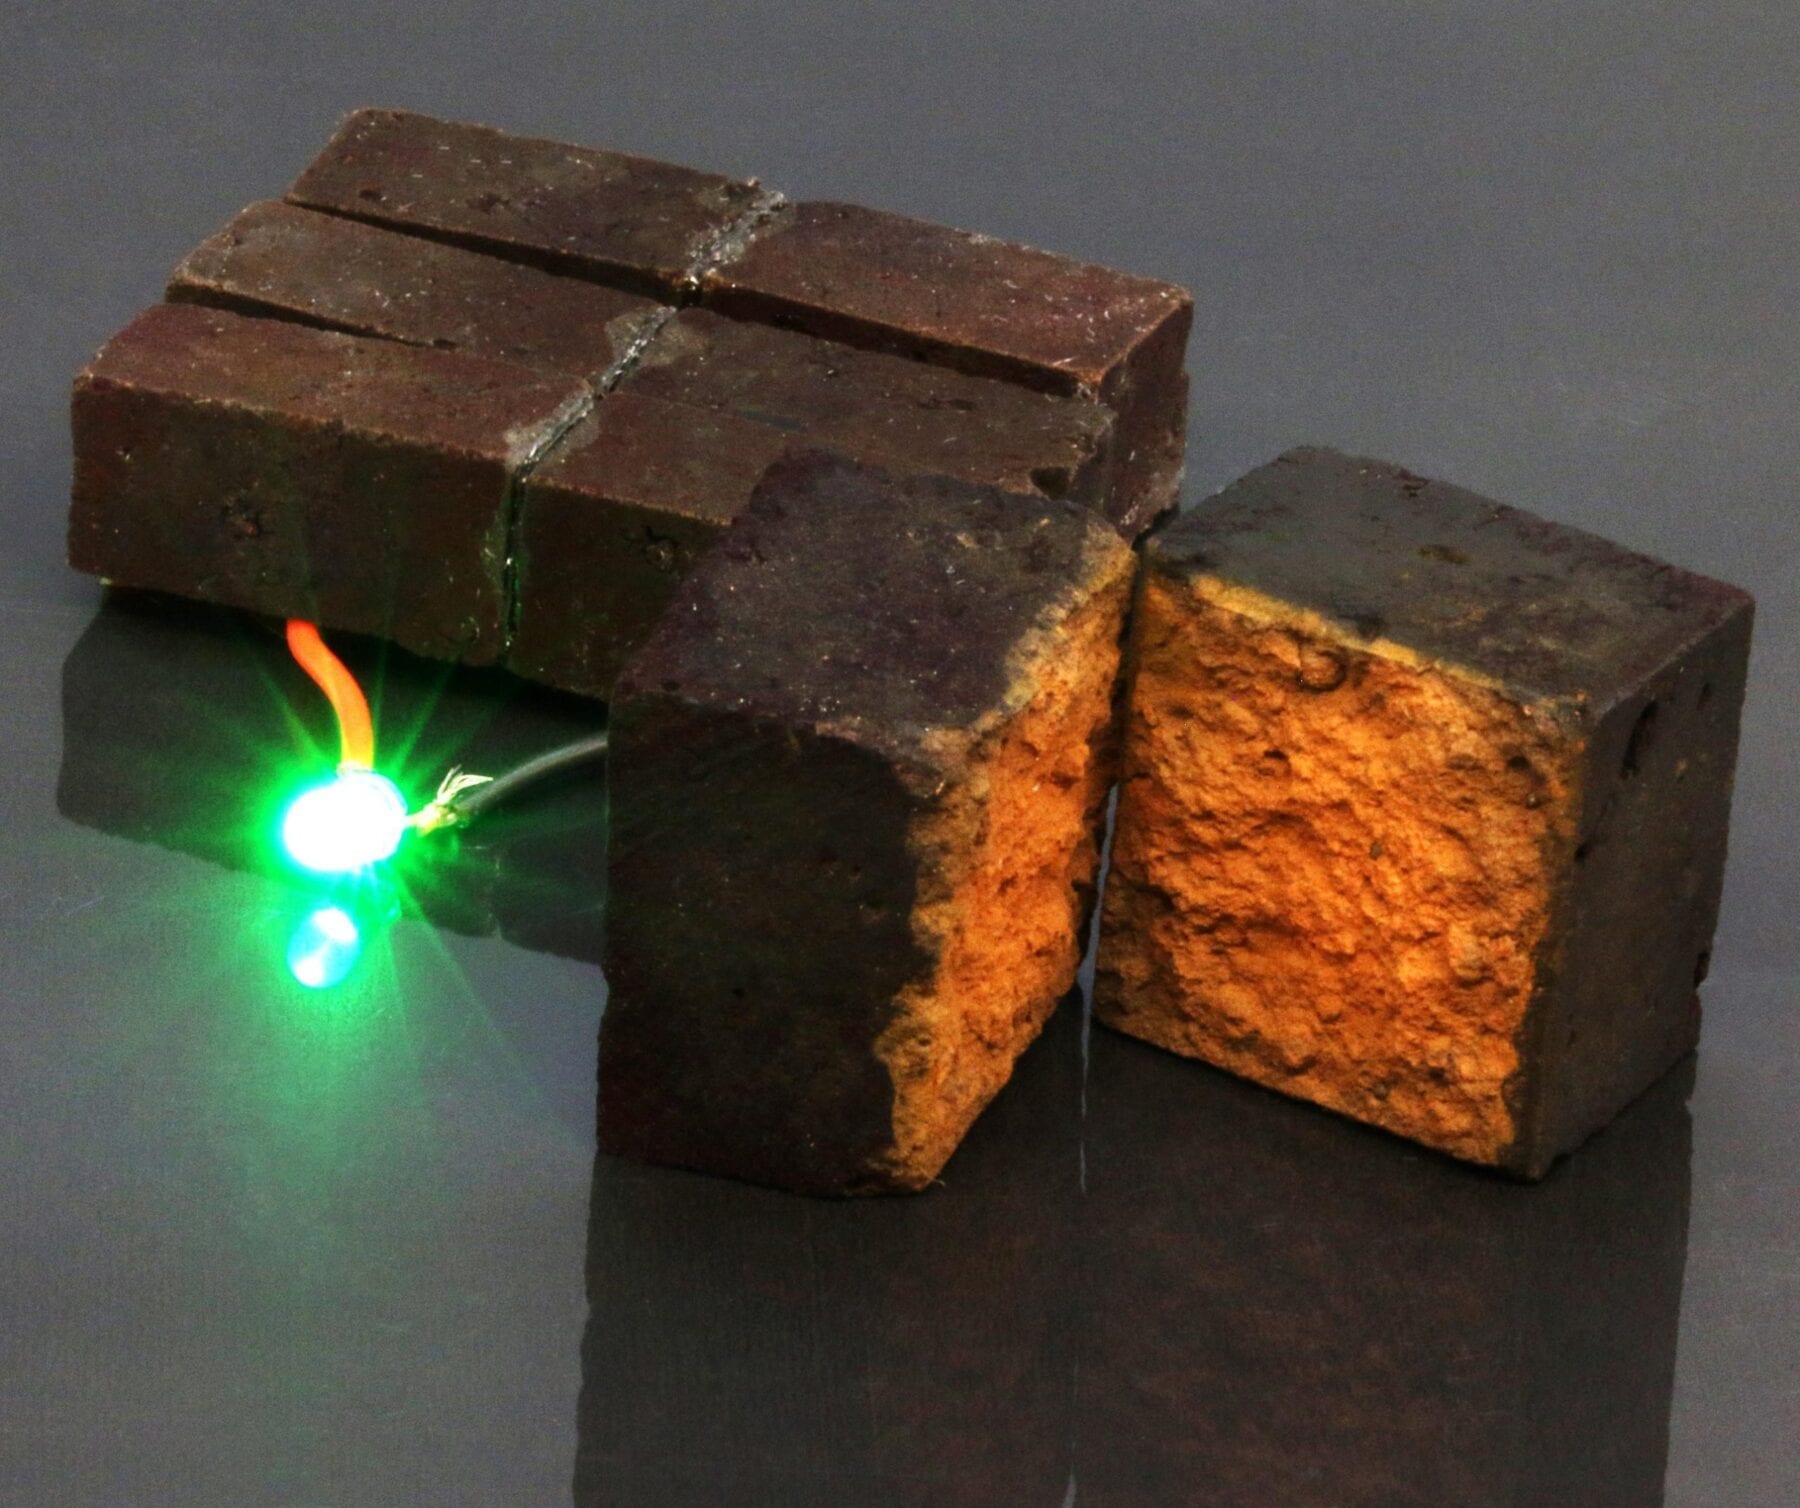 Chemists in Arts & Sciences have developed a method to make or modify “smart bricks” that can store energy until required for powering devices. (Image: D’Arcy laboratory)